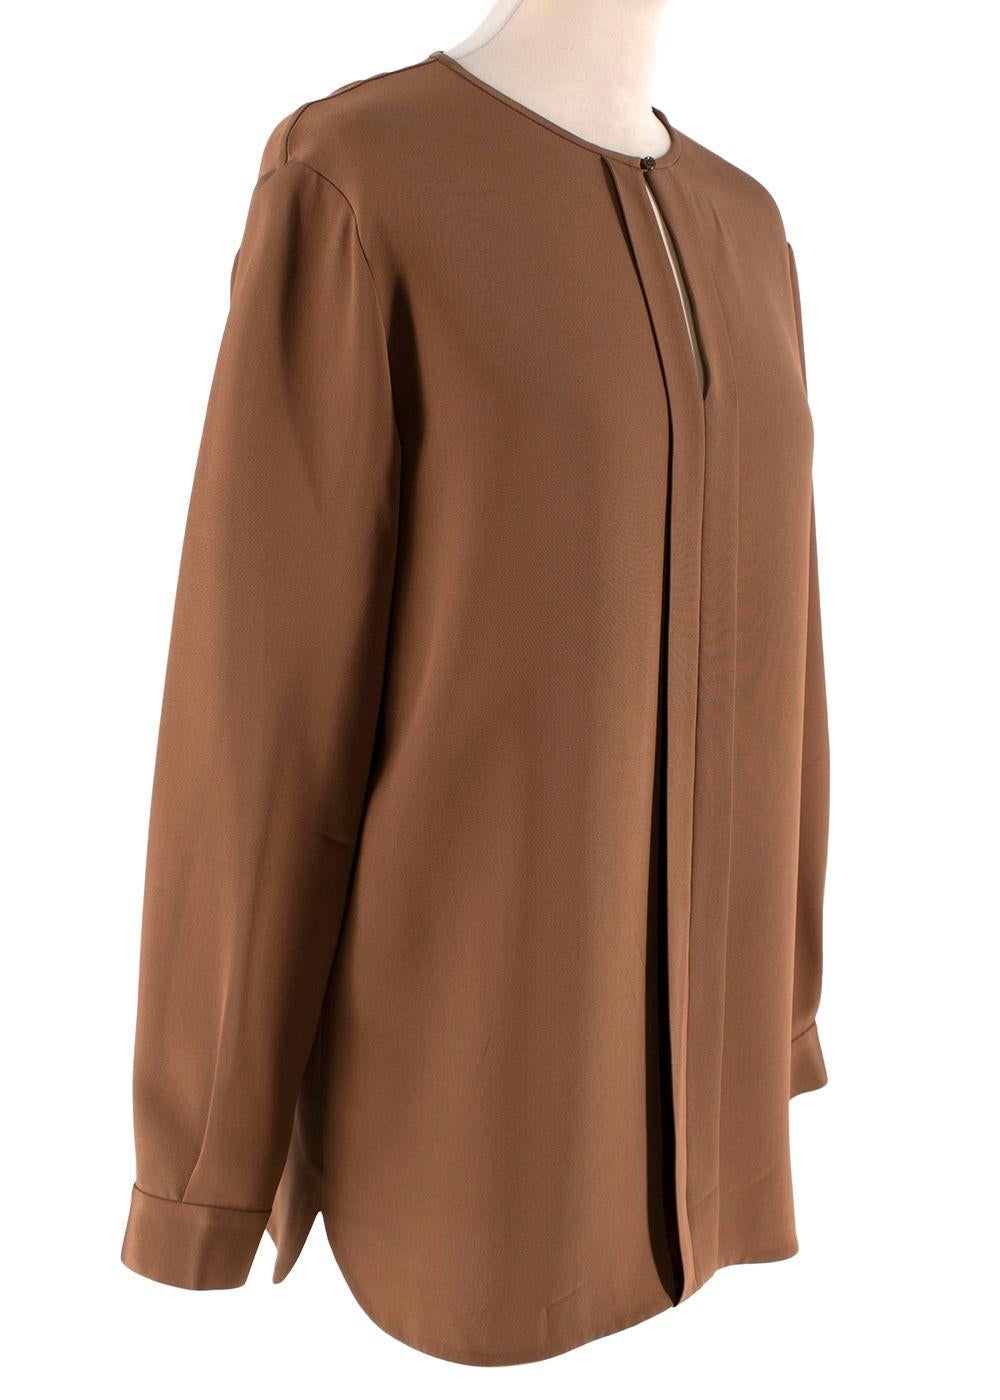 Loro Piana Tobacco Silk Keyhole Blouse

- Fluid silk blouse in a rich tobacco hue
- Collarless, with keyhole notch
- Long, button finished cuffs
- Box pleat front
- Relaxed cut

Materials 
100% Silk 

Made in Italy 
Wash separately inside out 

Item